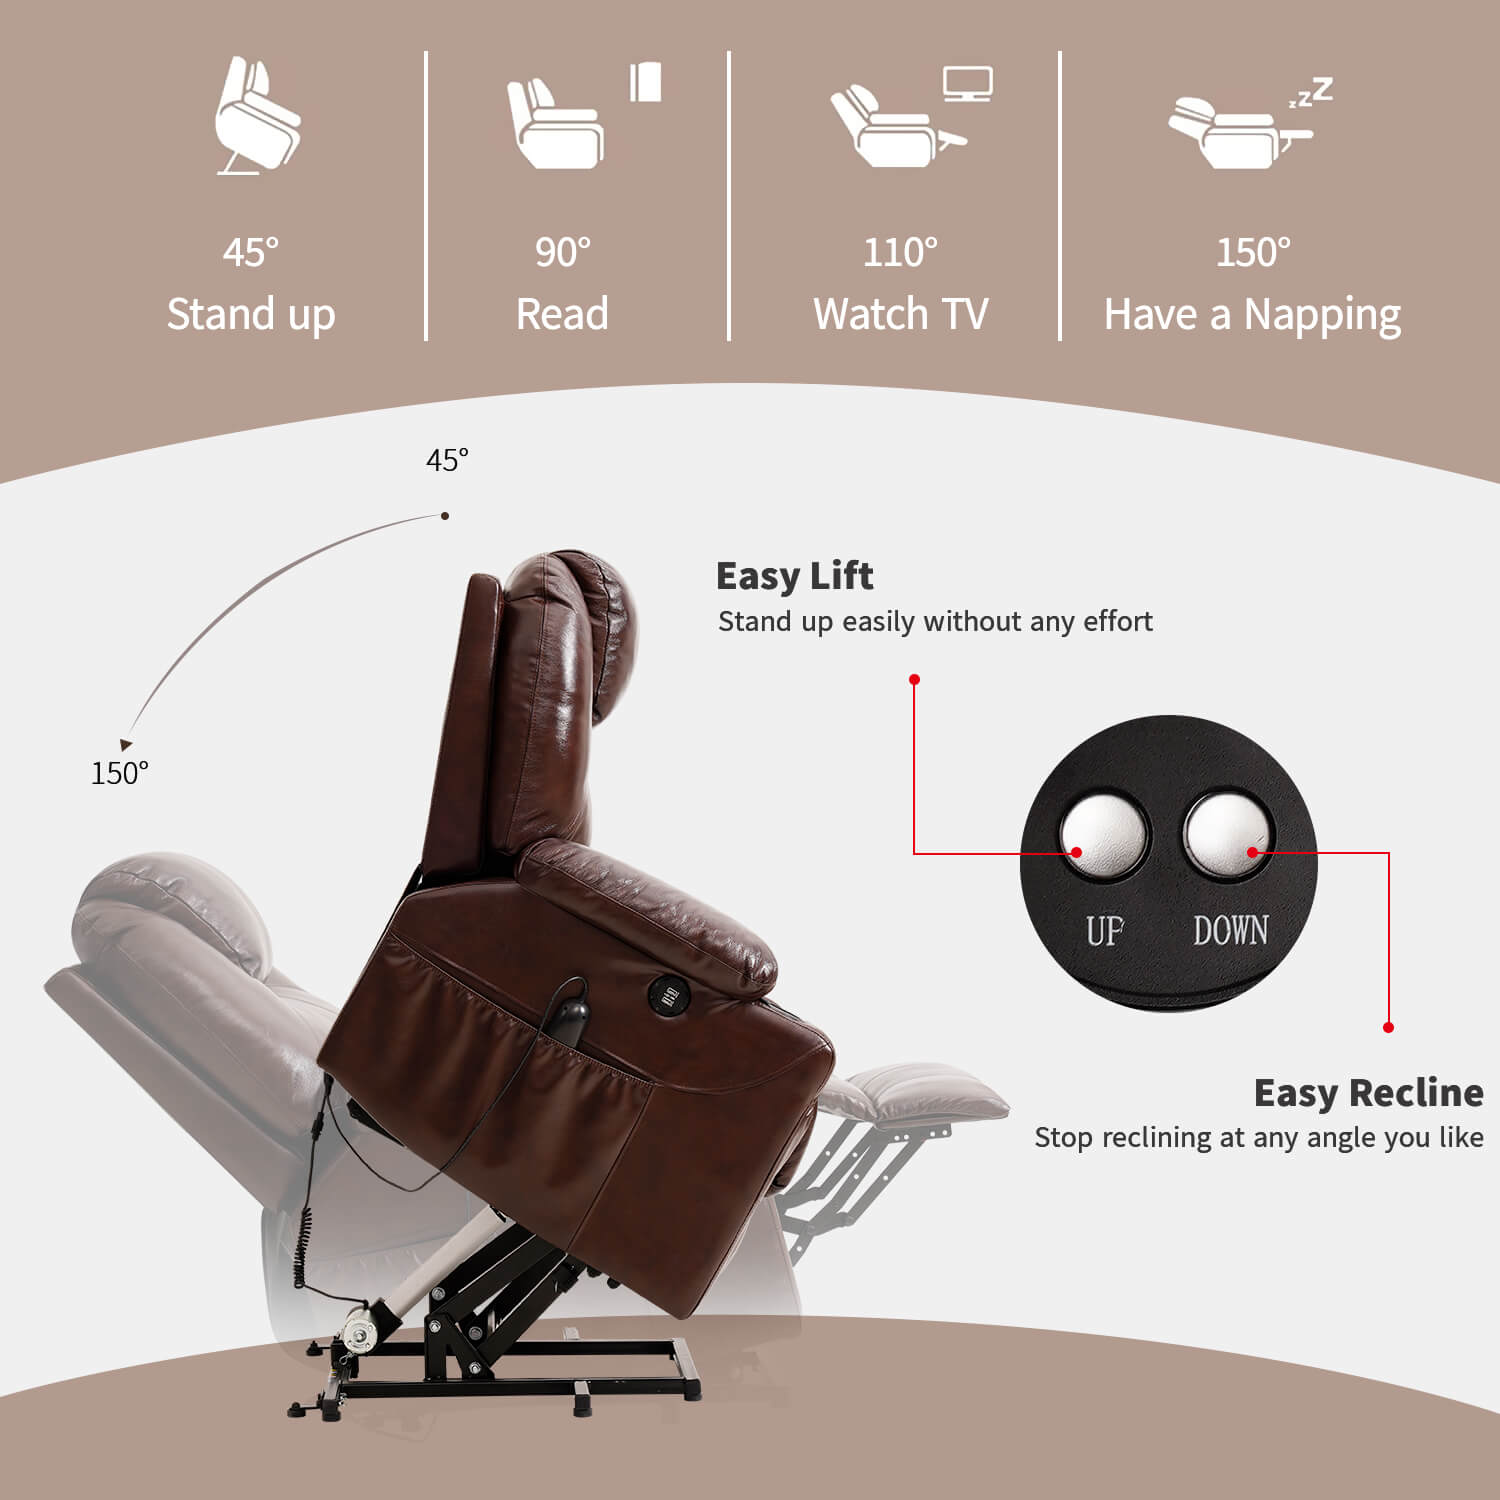 Genuine Leather Power Lift Chair Electric Recliner is easy to lift and recline